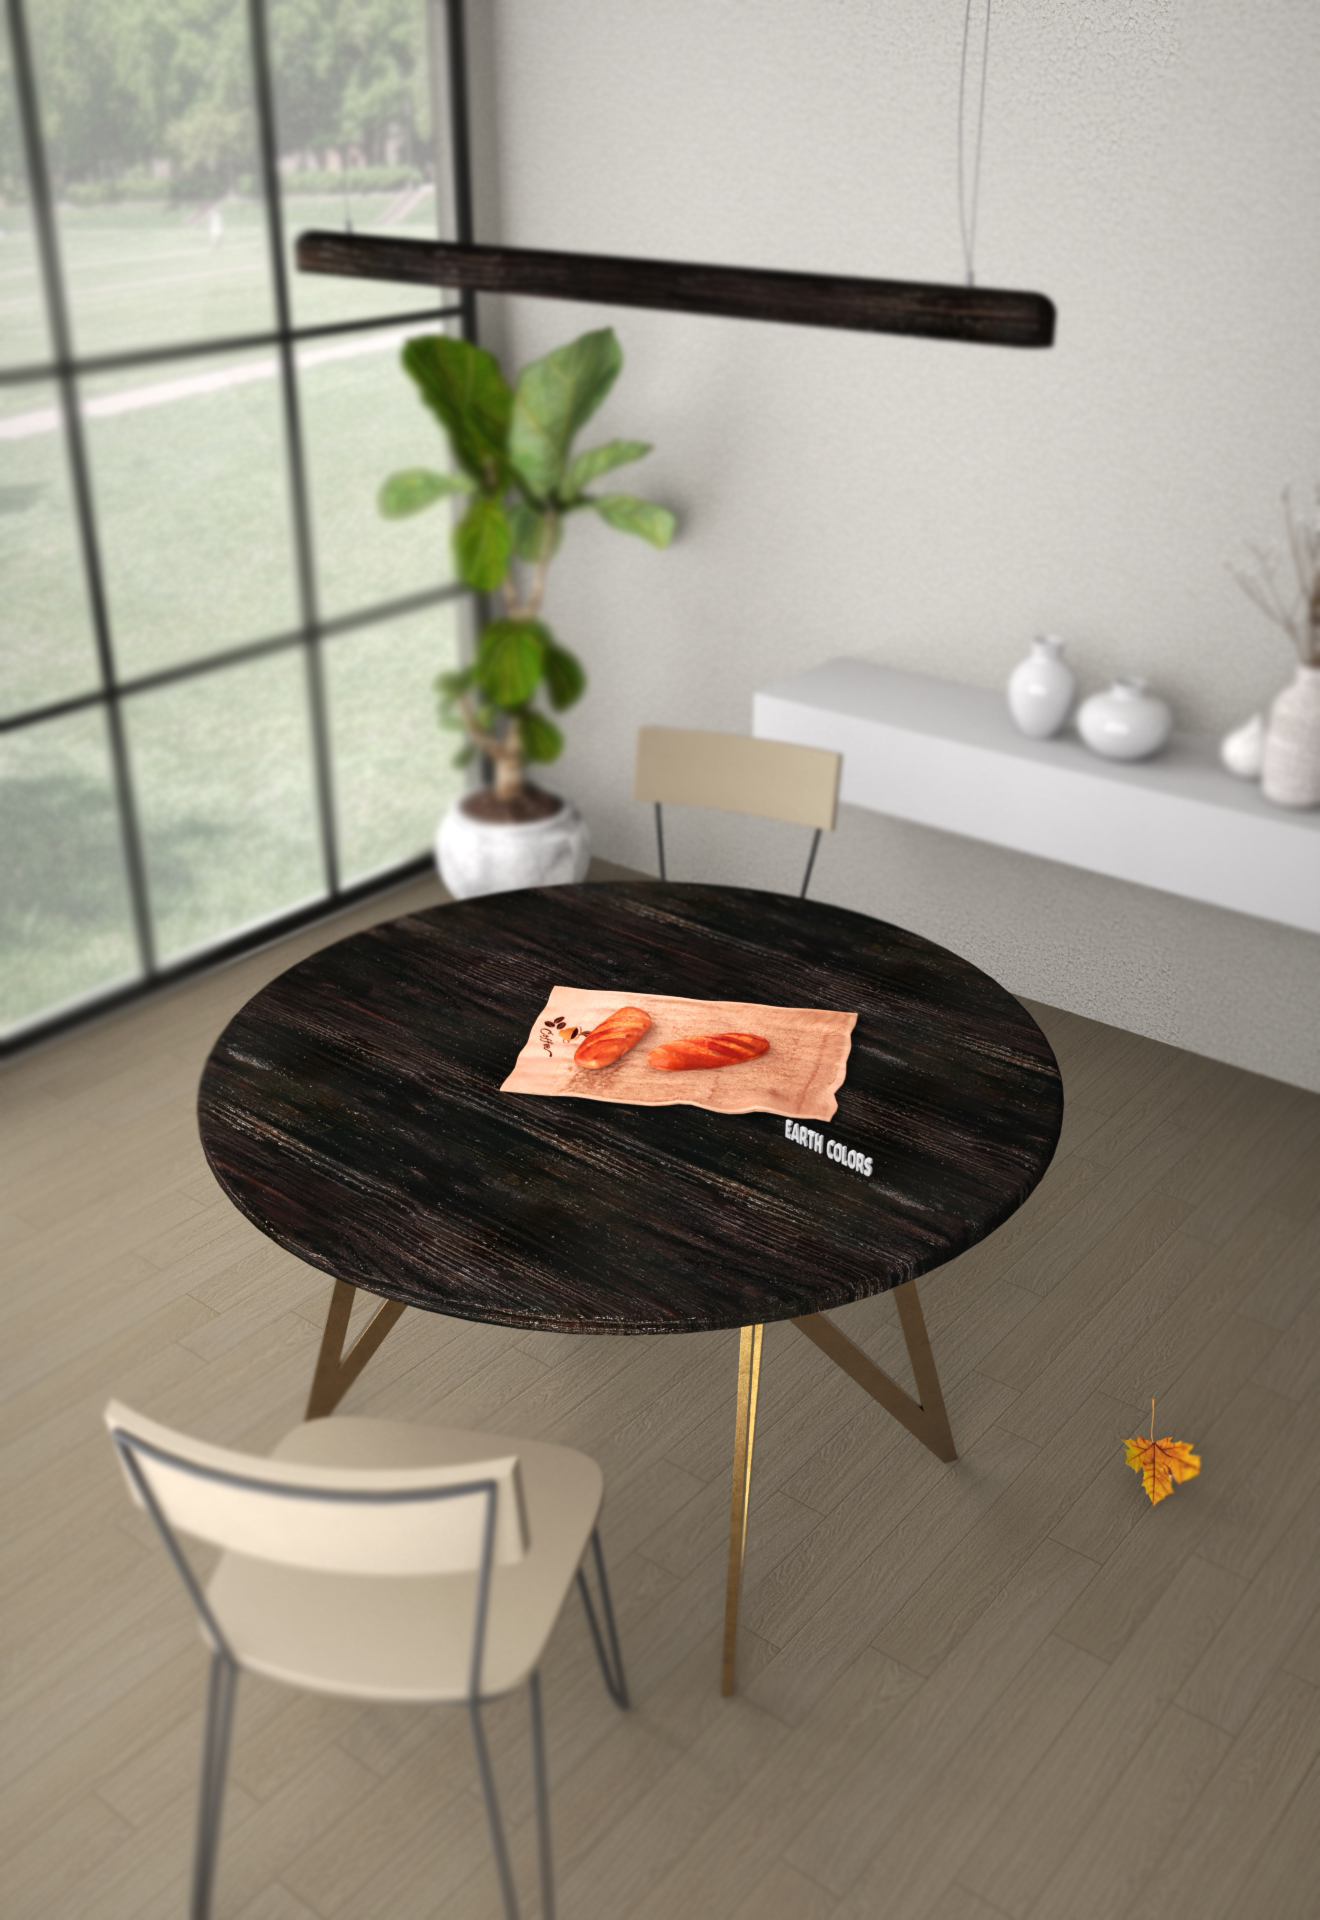 EARTHCOLORS is able to make round dining table with leaf